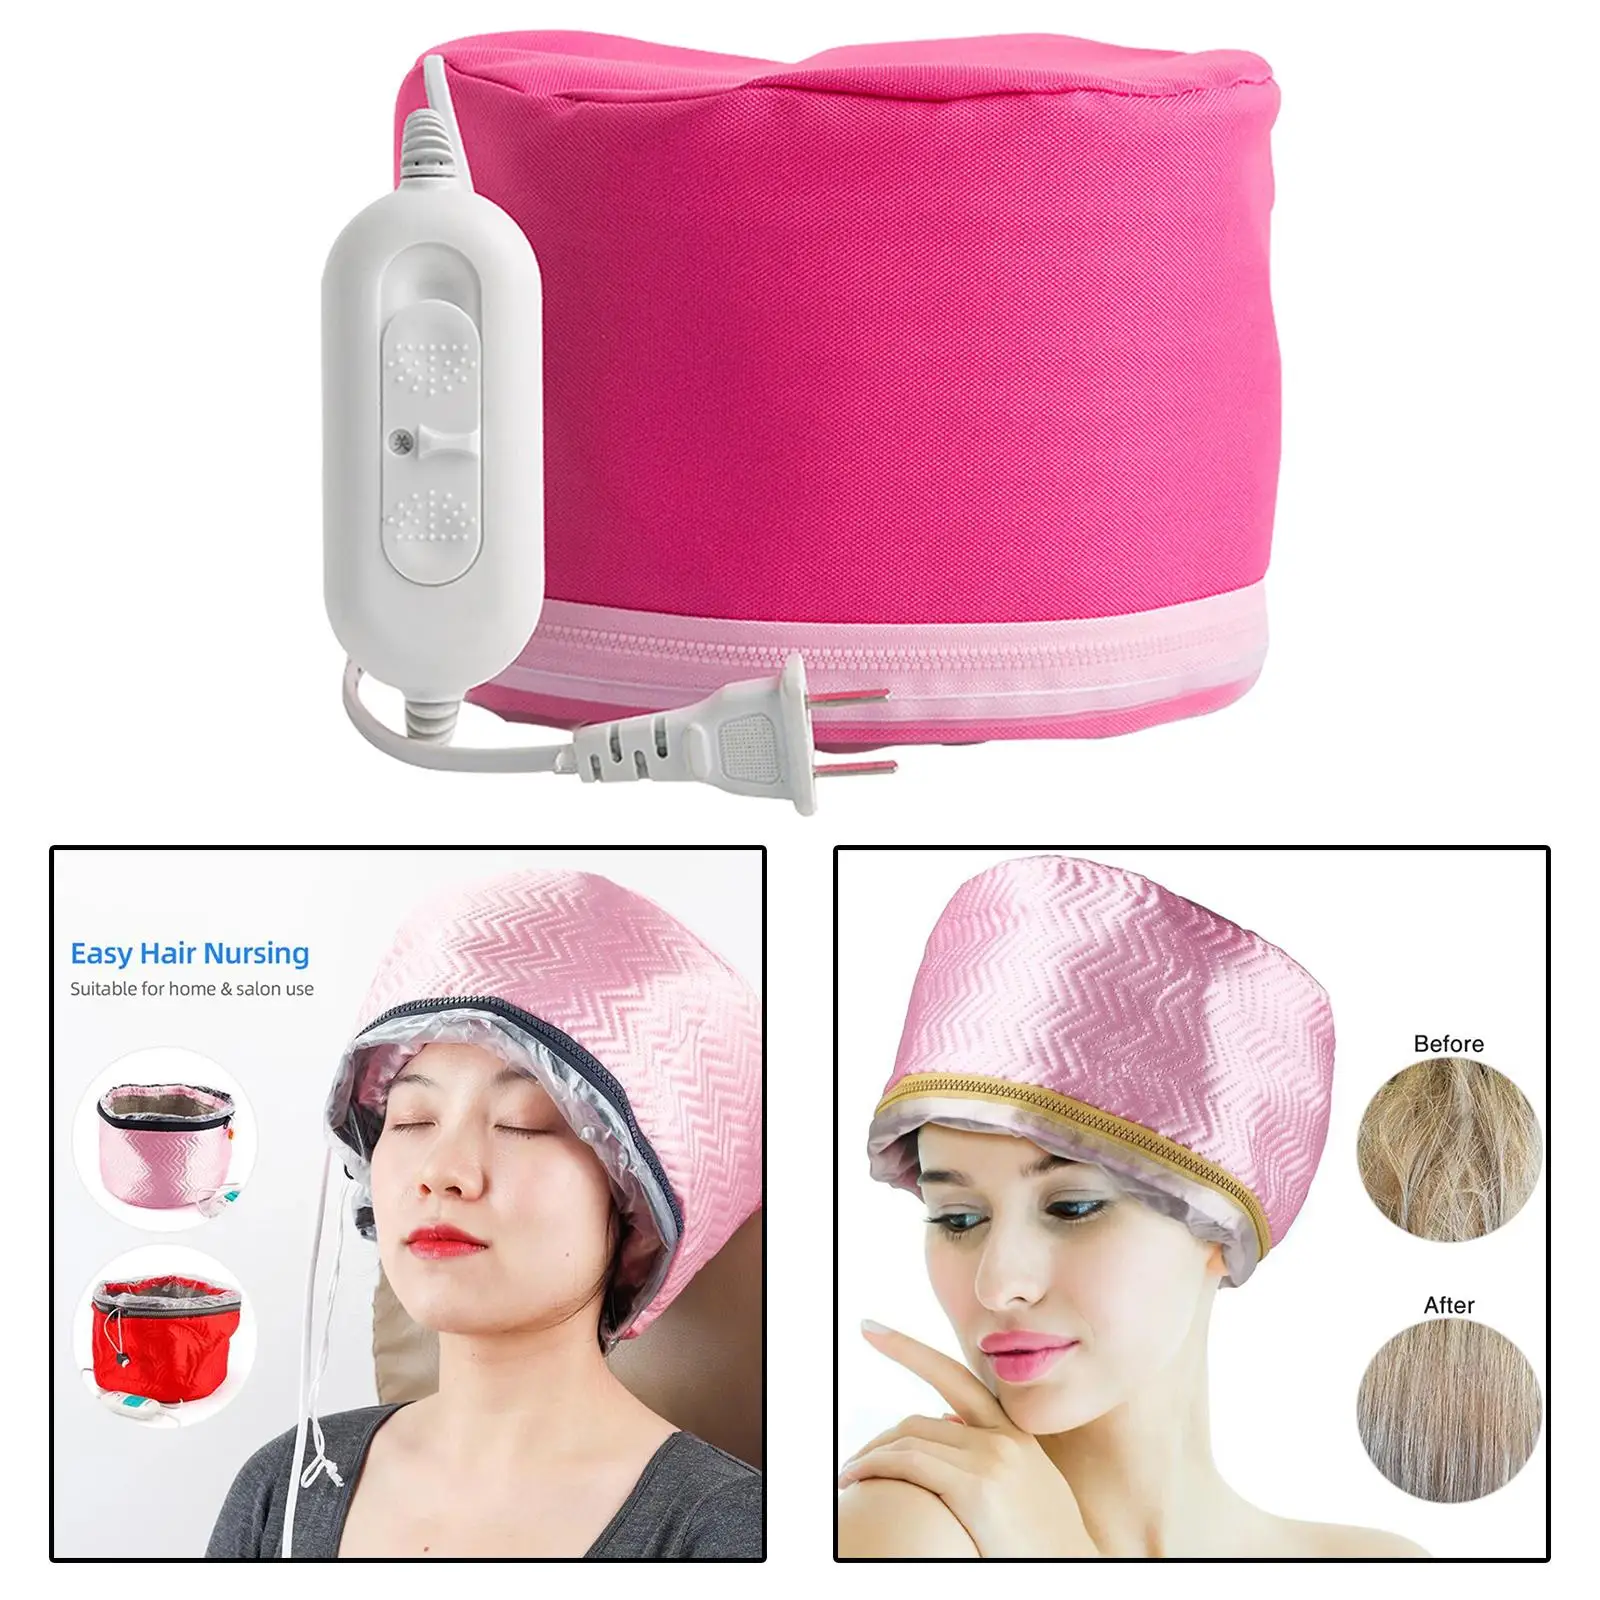 Hair Heating Caps Steamer 3-Mode Adjustable Thermal Caps Dryers for Deep Conditioning Salon Hair Scalp Hot Head Care Nursing